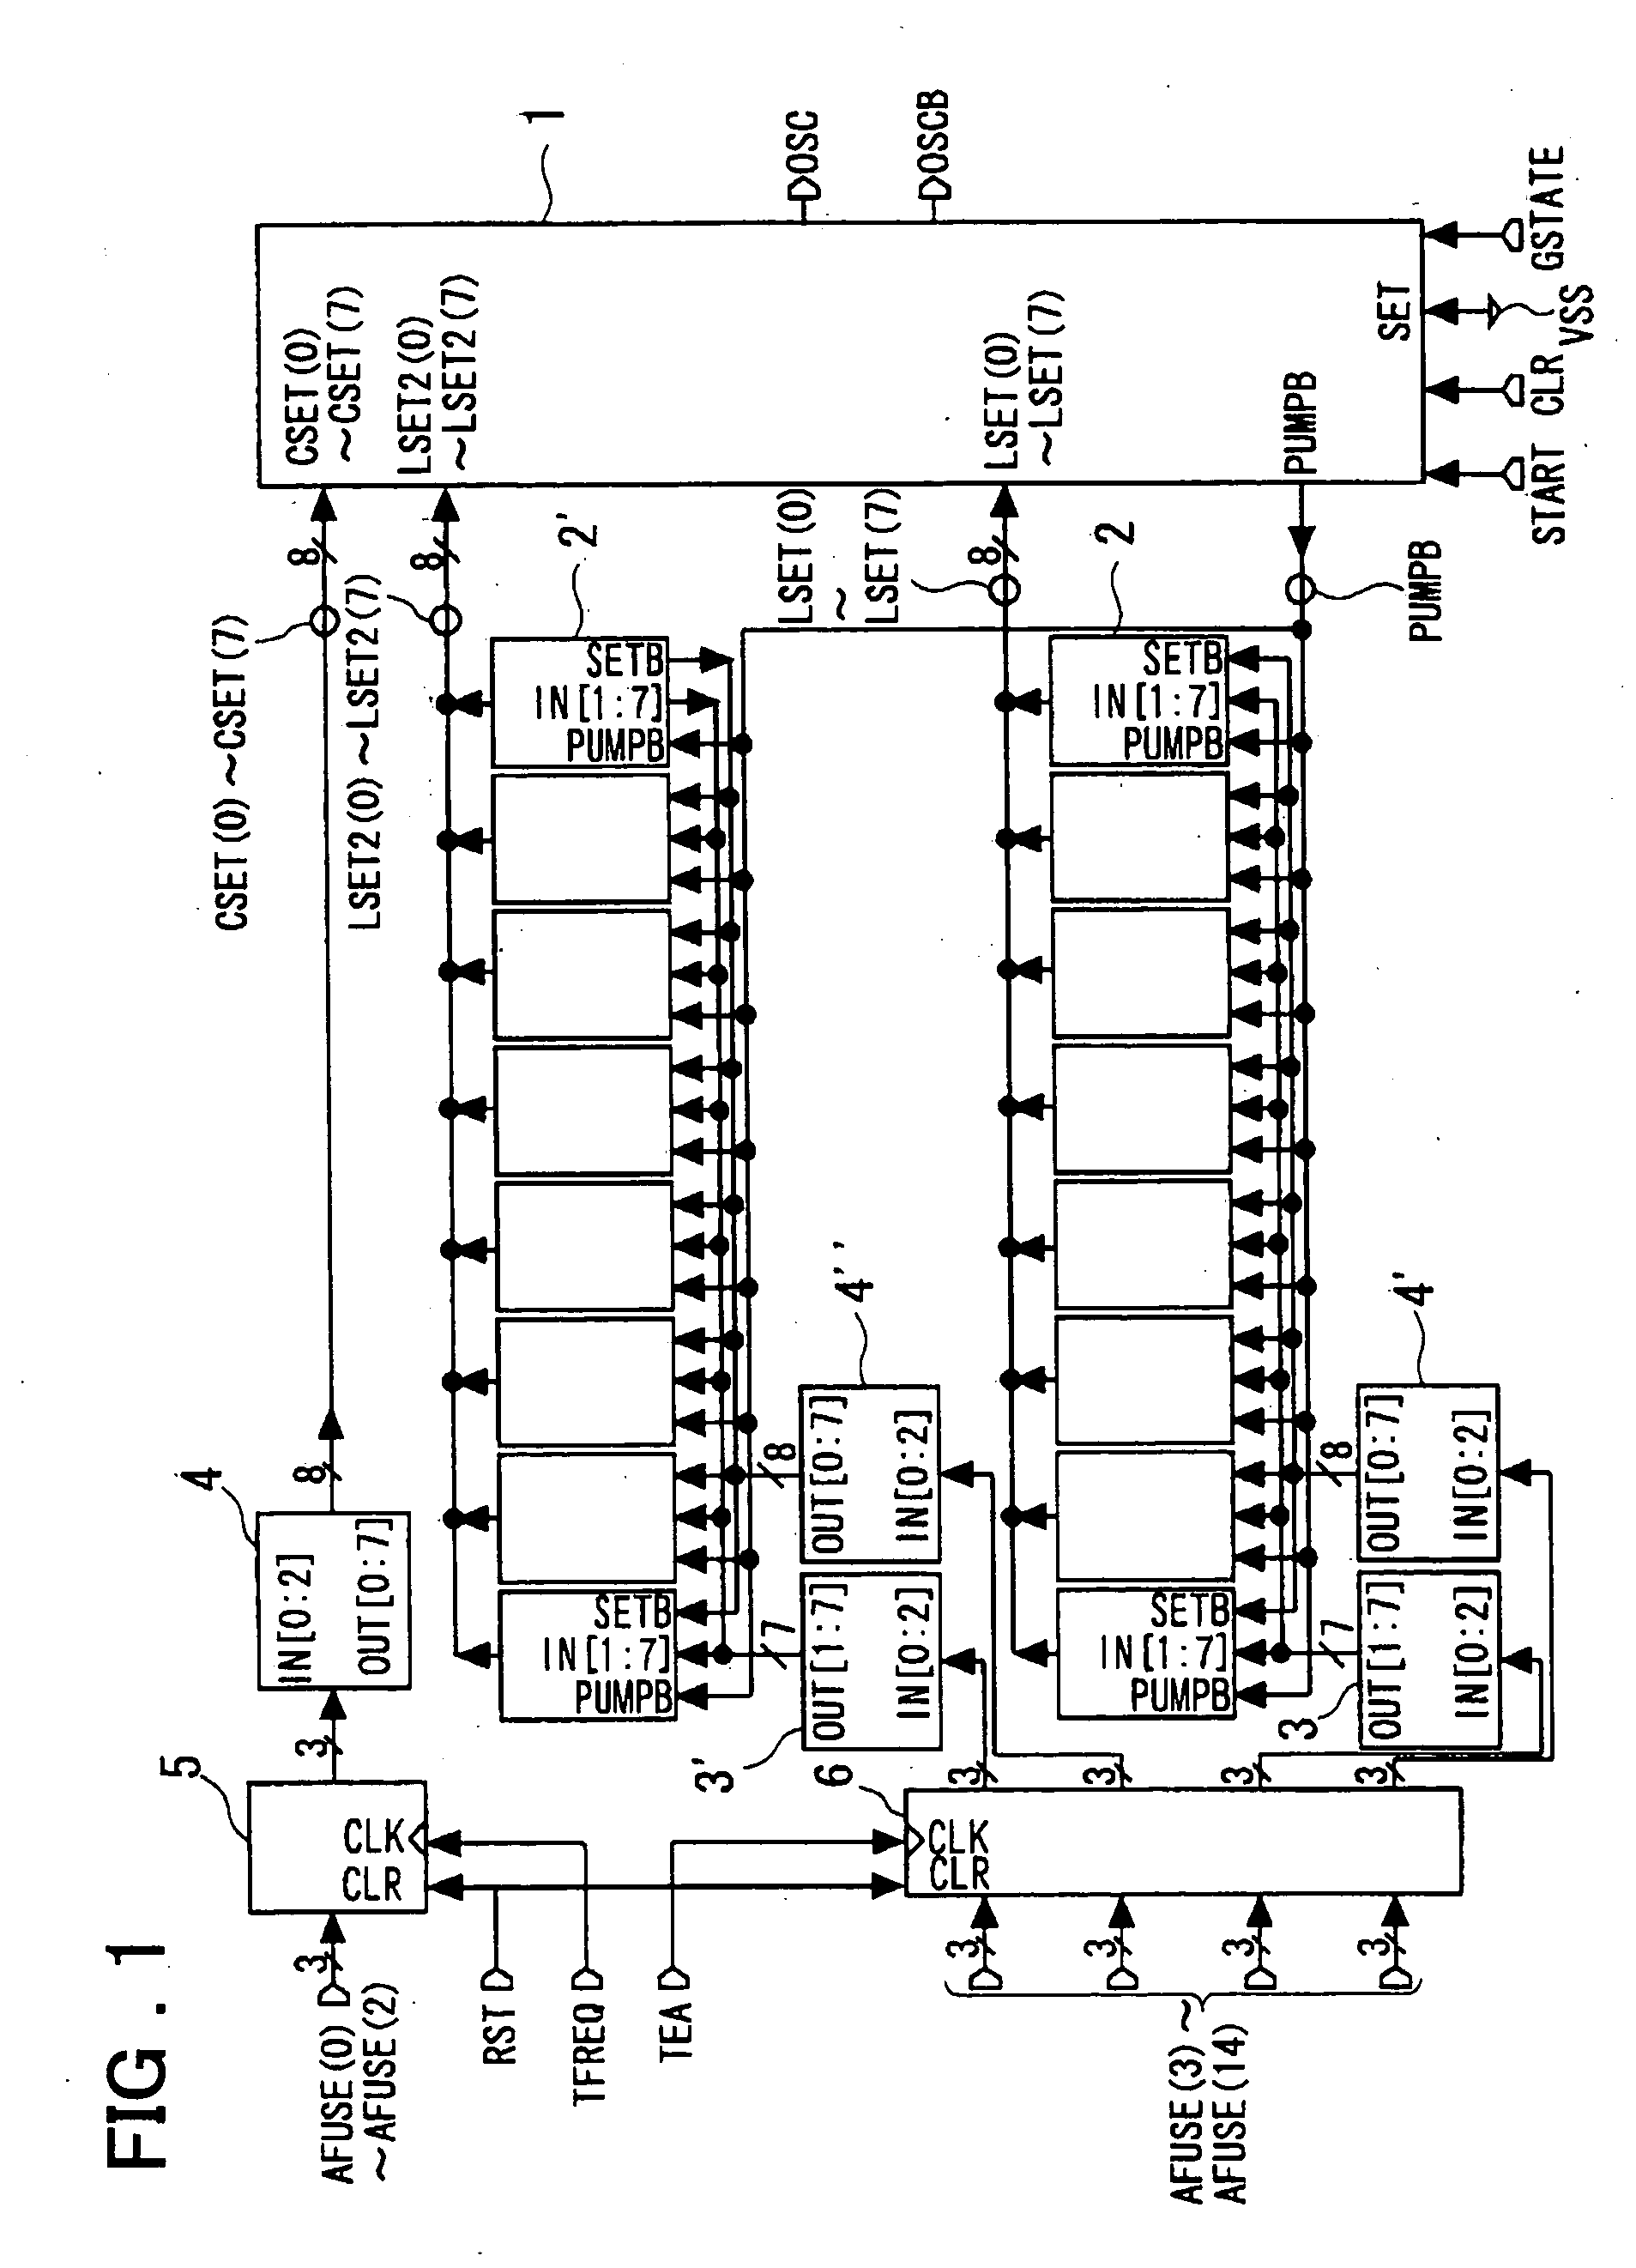 Cell leakage monitoring circuit and monitoring method